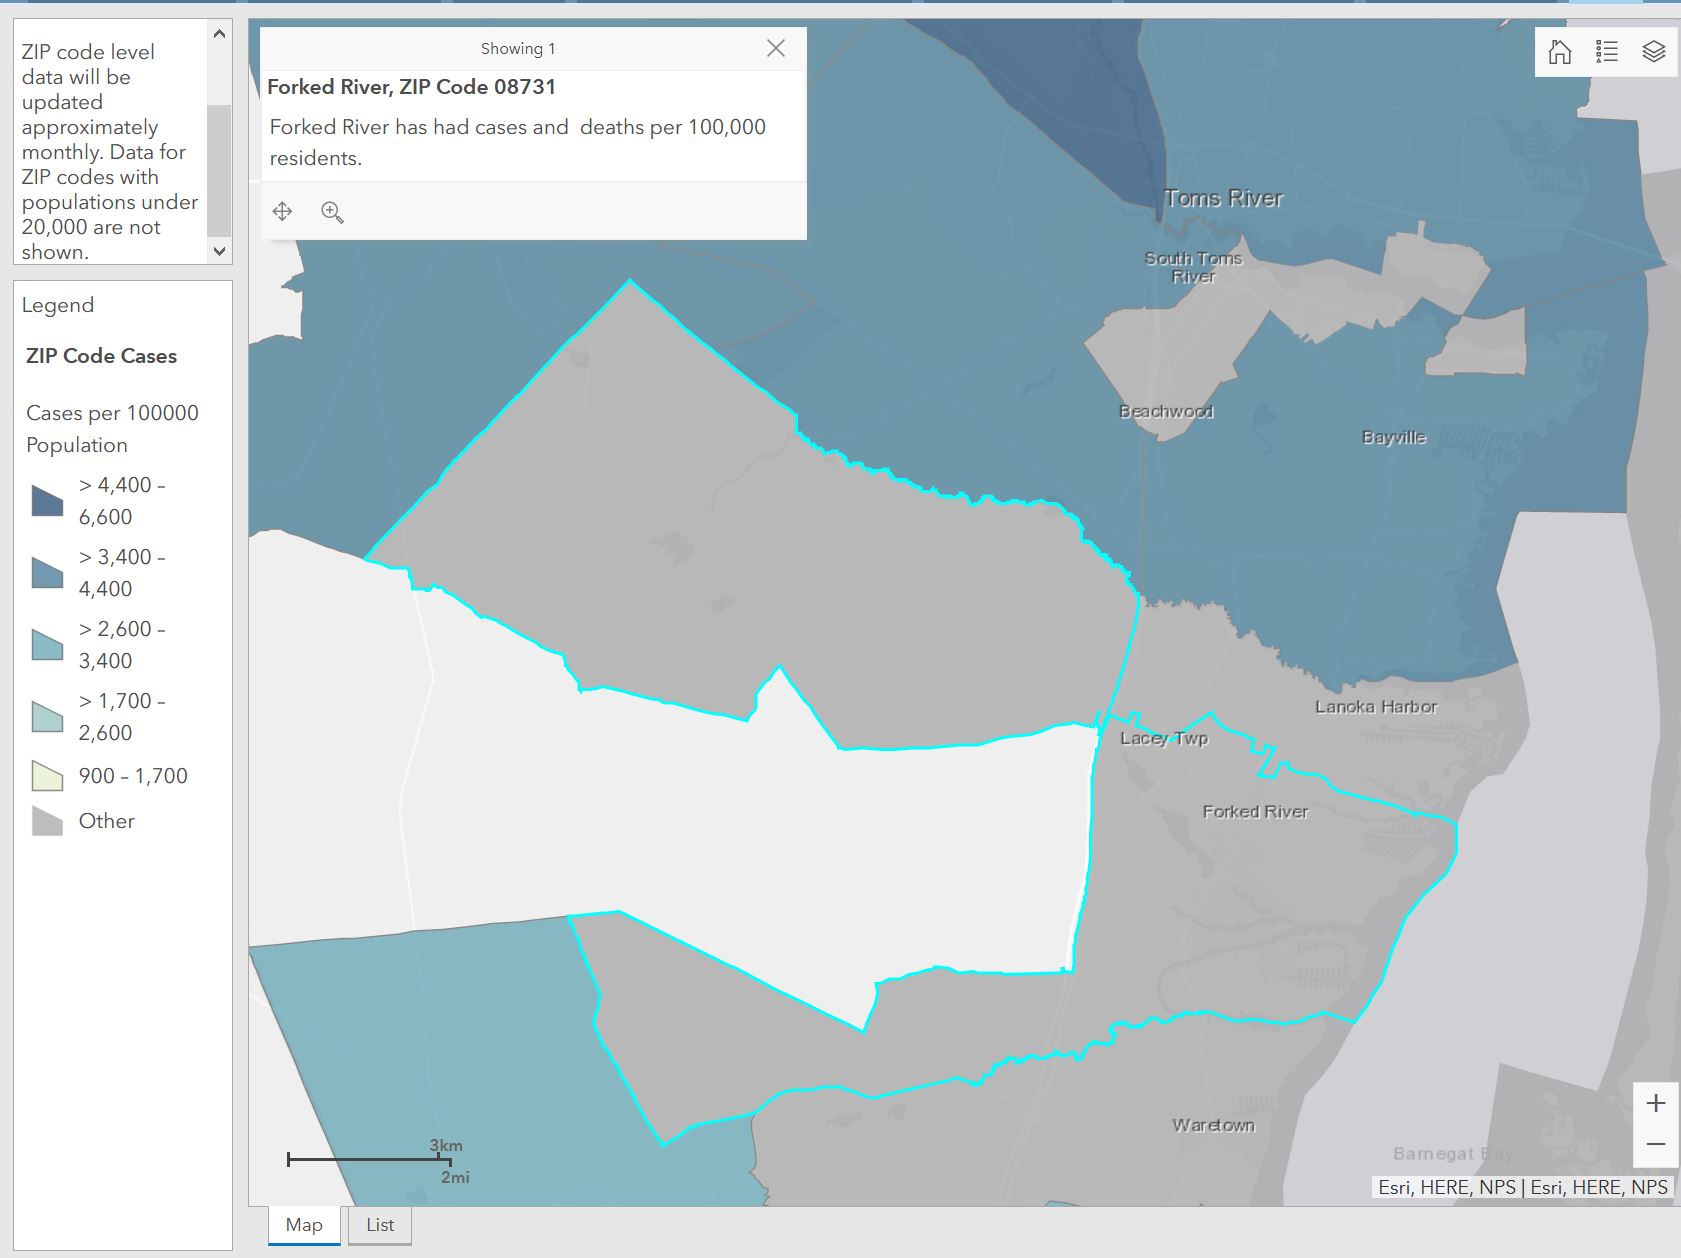 NJ ZIP code level dashboard showing Forked River (08731) selected with data suppressed